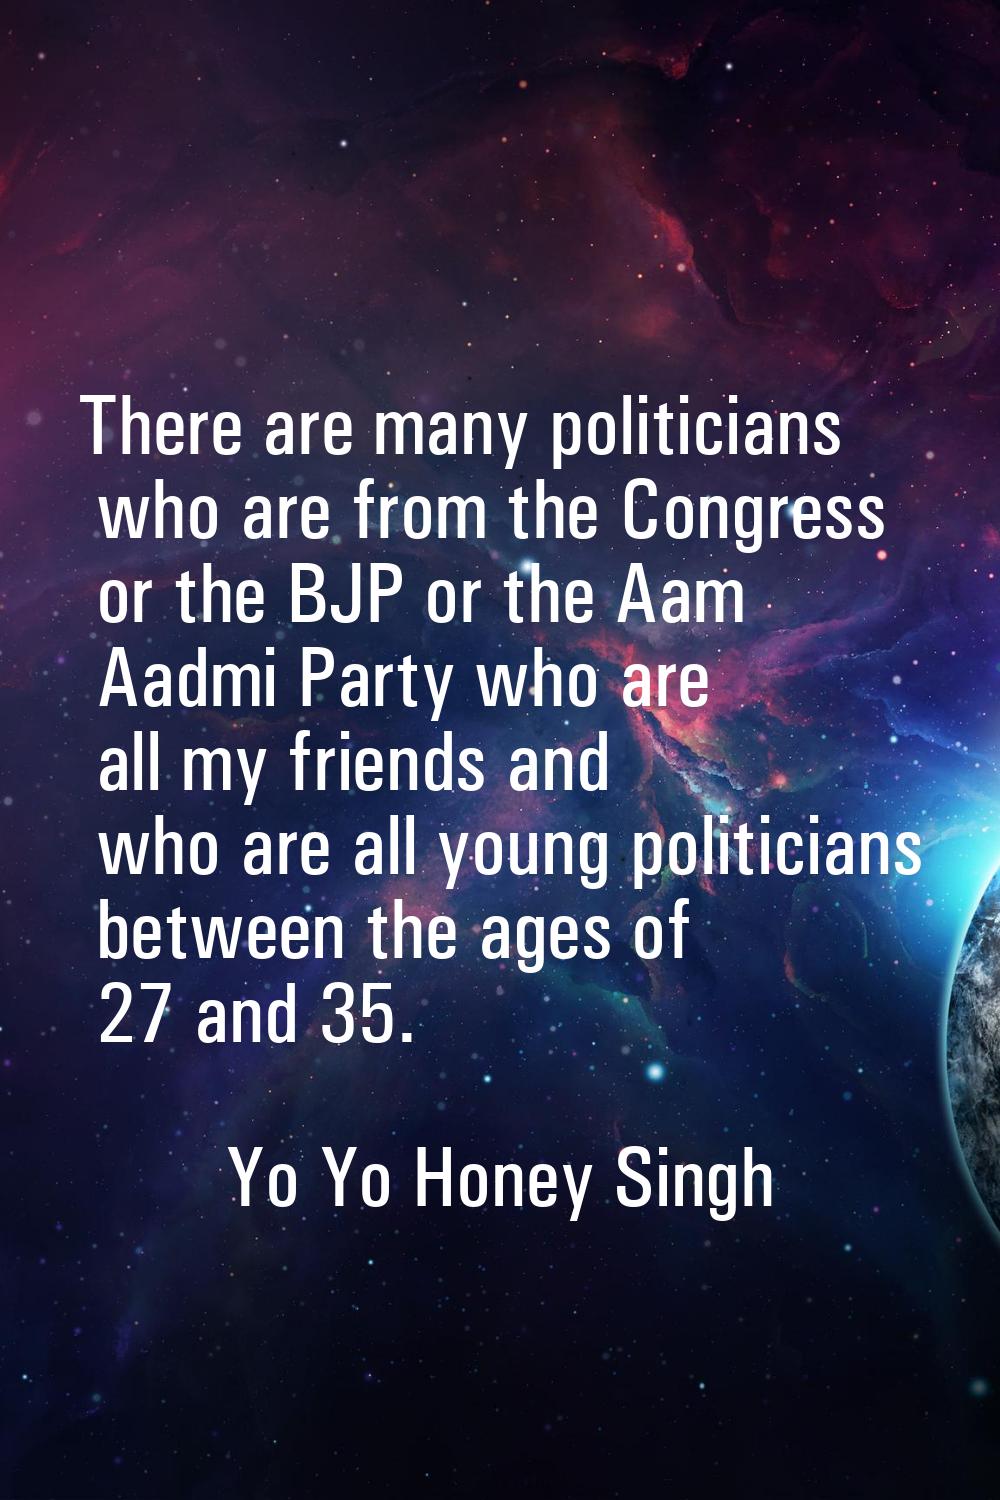 There are many politicians who are from the Congress or the BJP or the Aam Aadmi Party who are all 